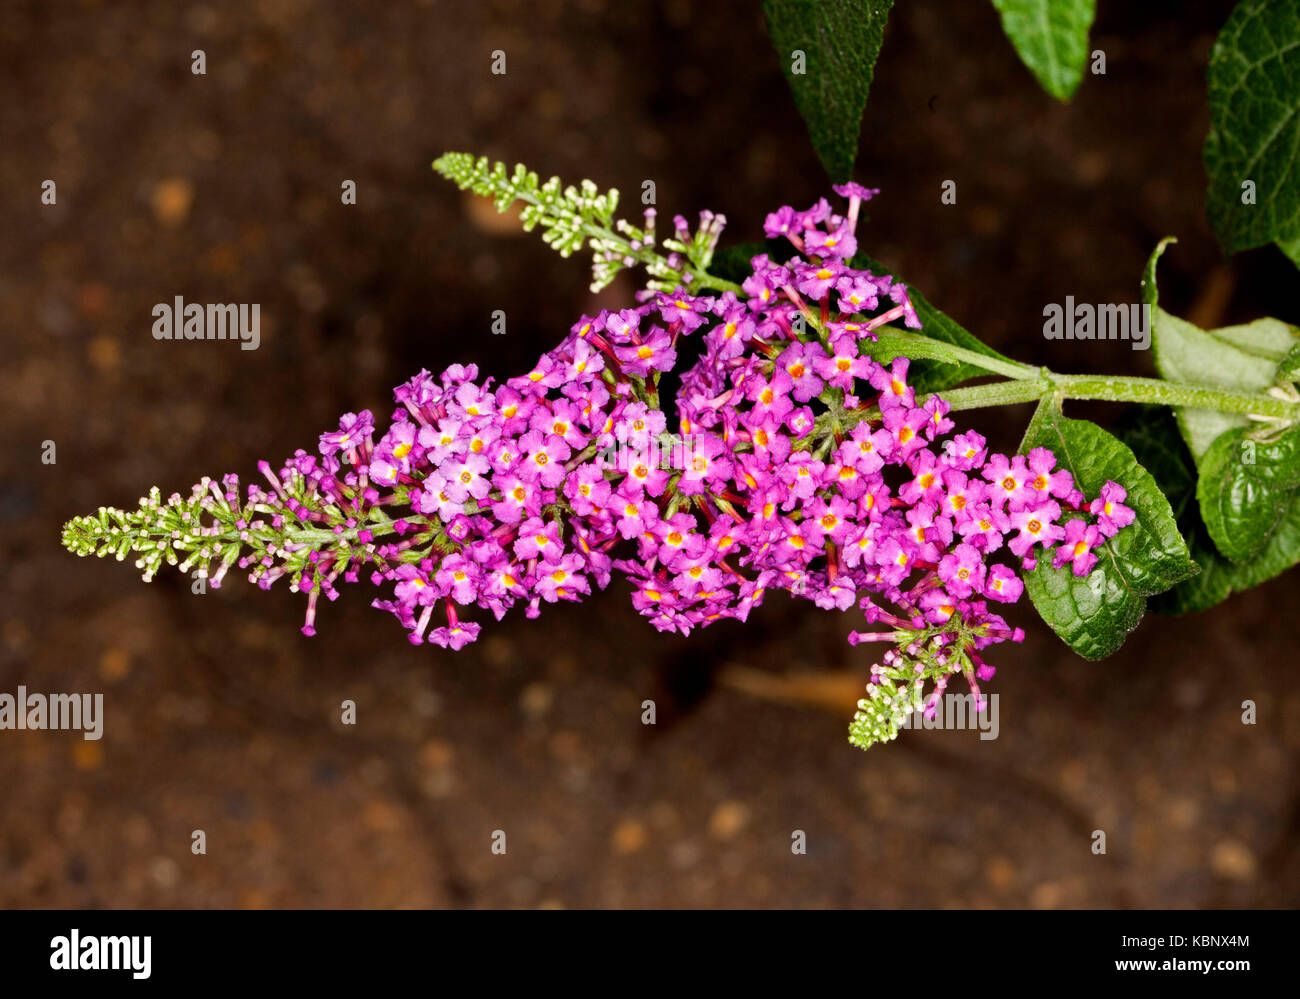 Spike of vivid magenta / pink flowers with buds and green foliage of evergreen shrub Buddleia 'CranRazz' against dark background Stock Photo